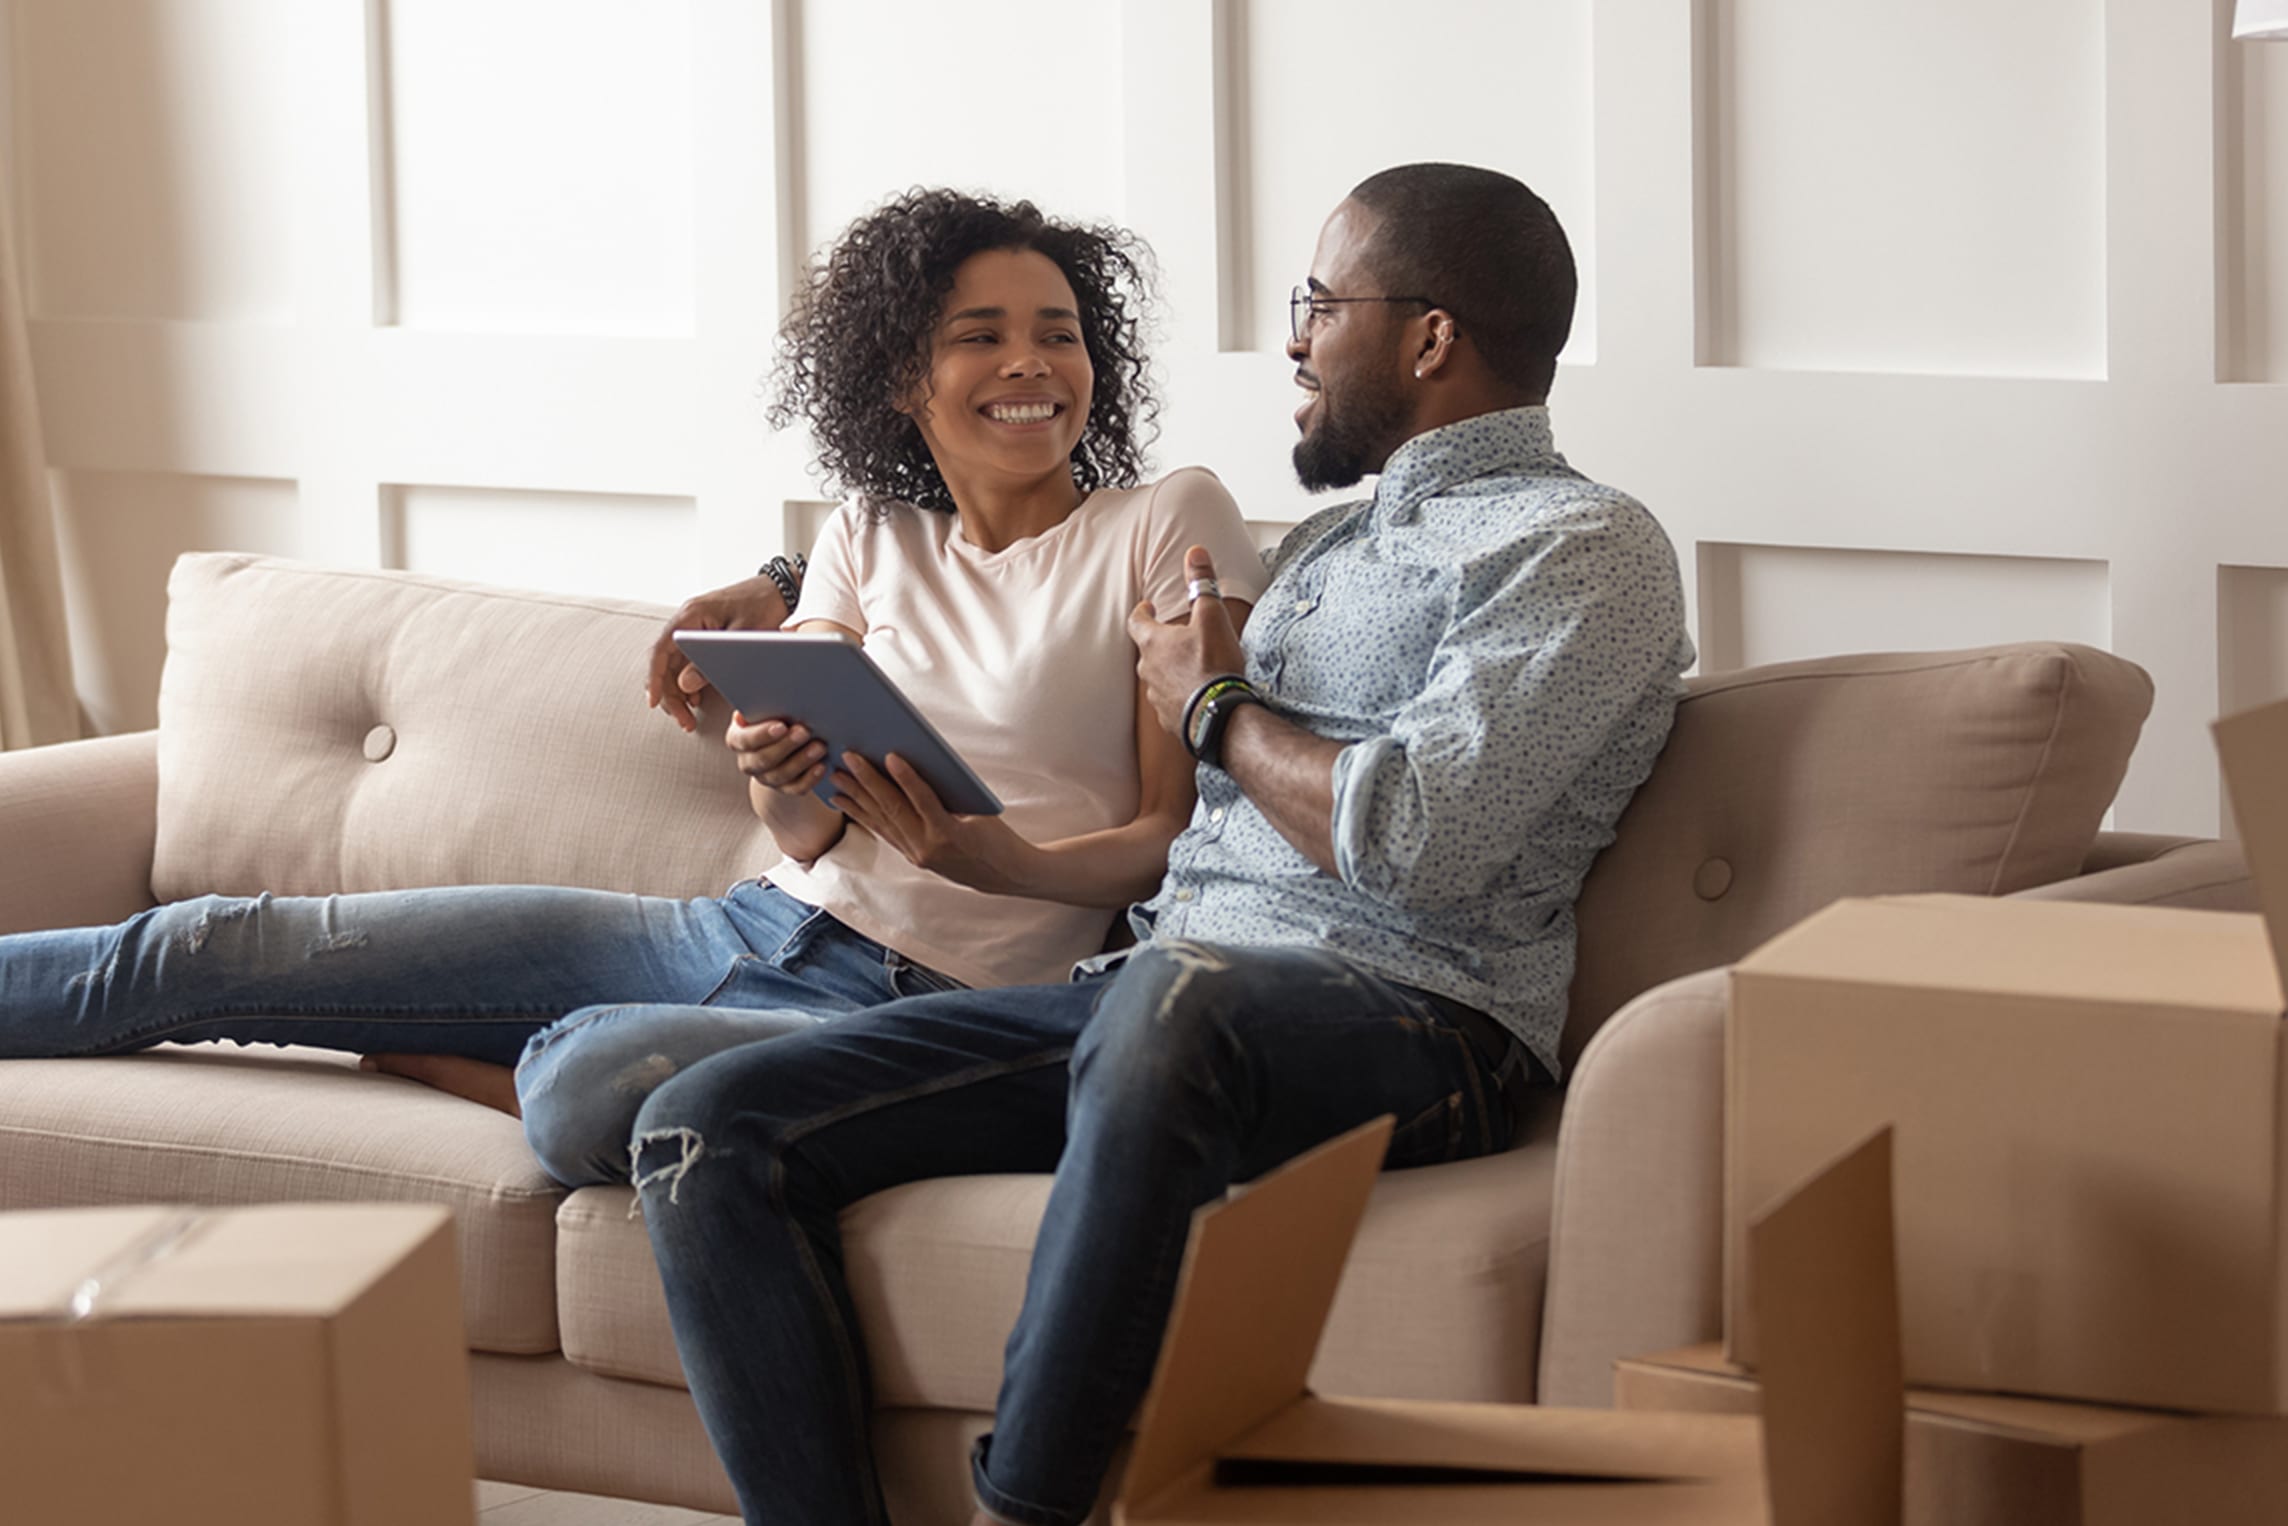 Happy couple uses a tablet together on a couch.